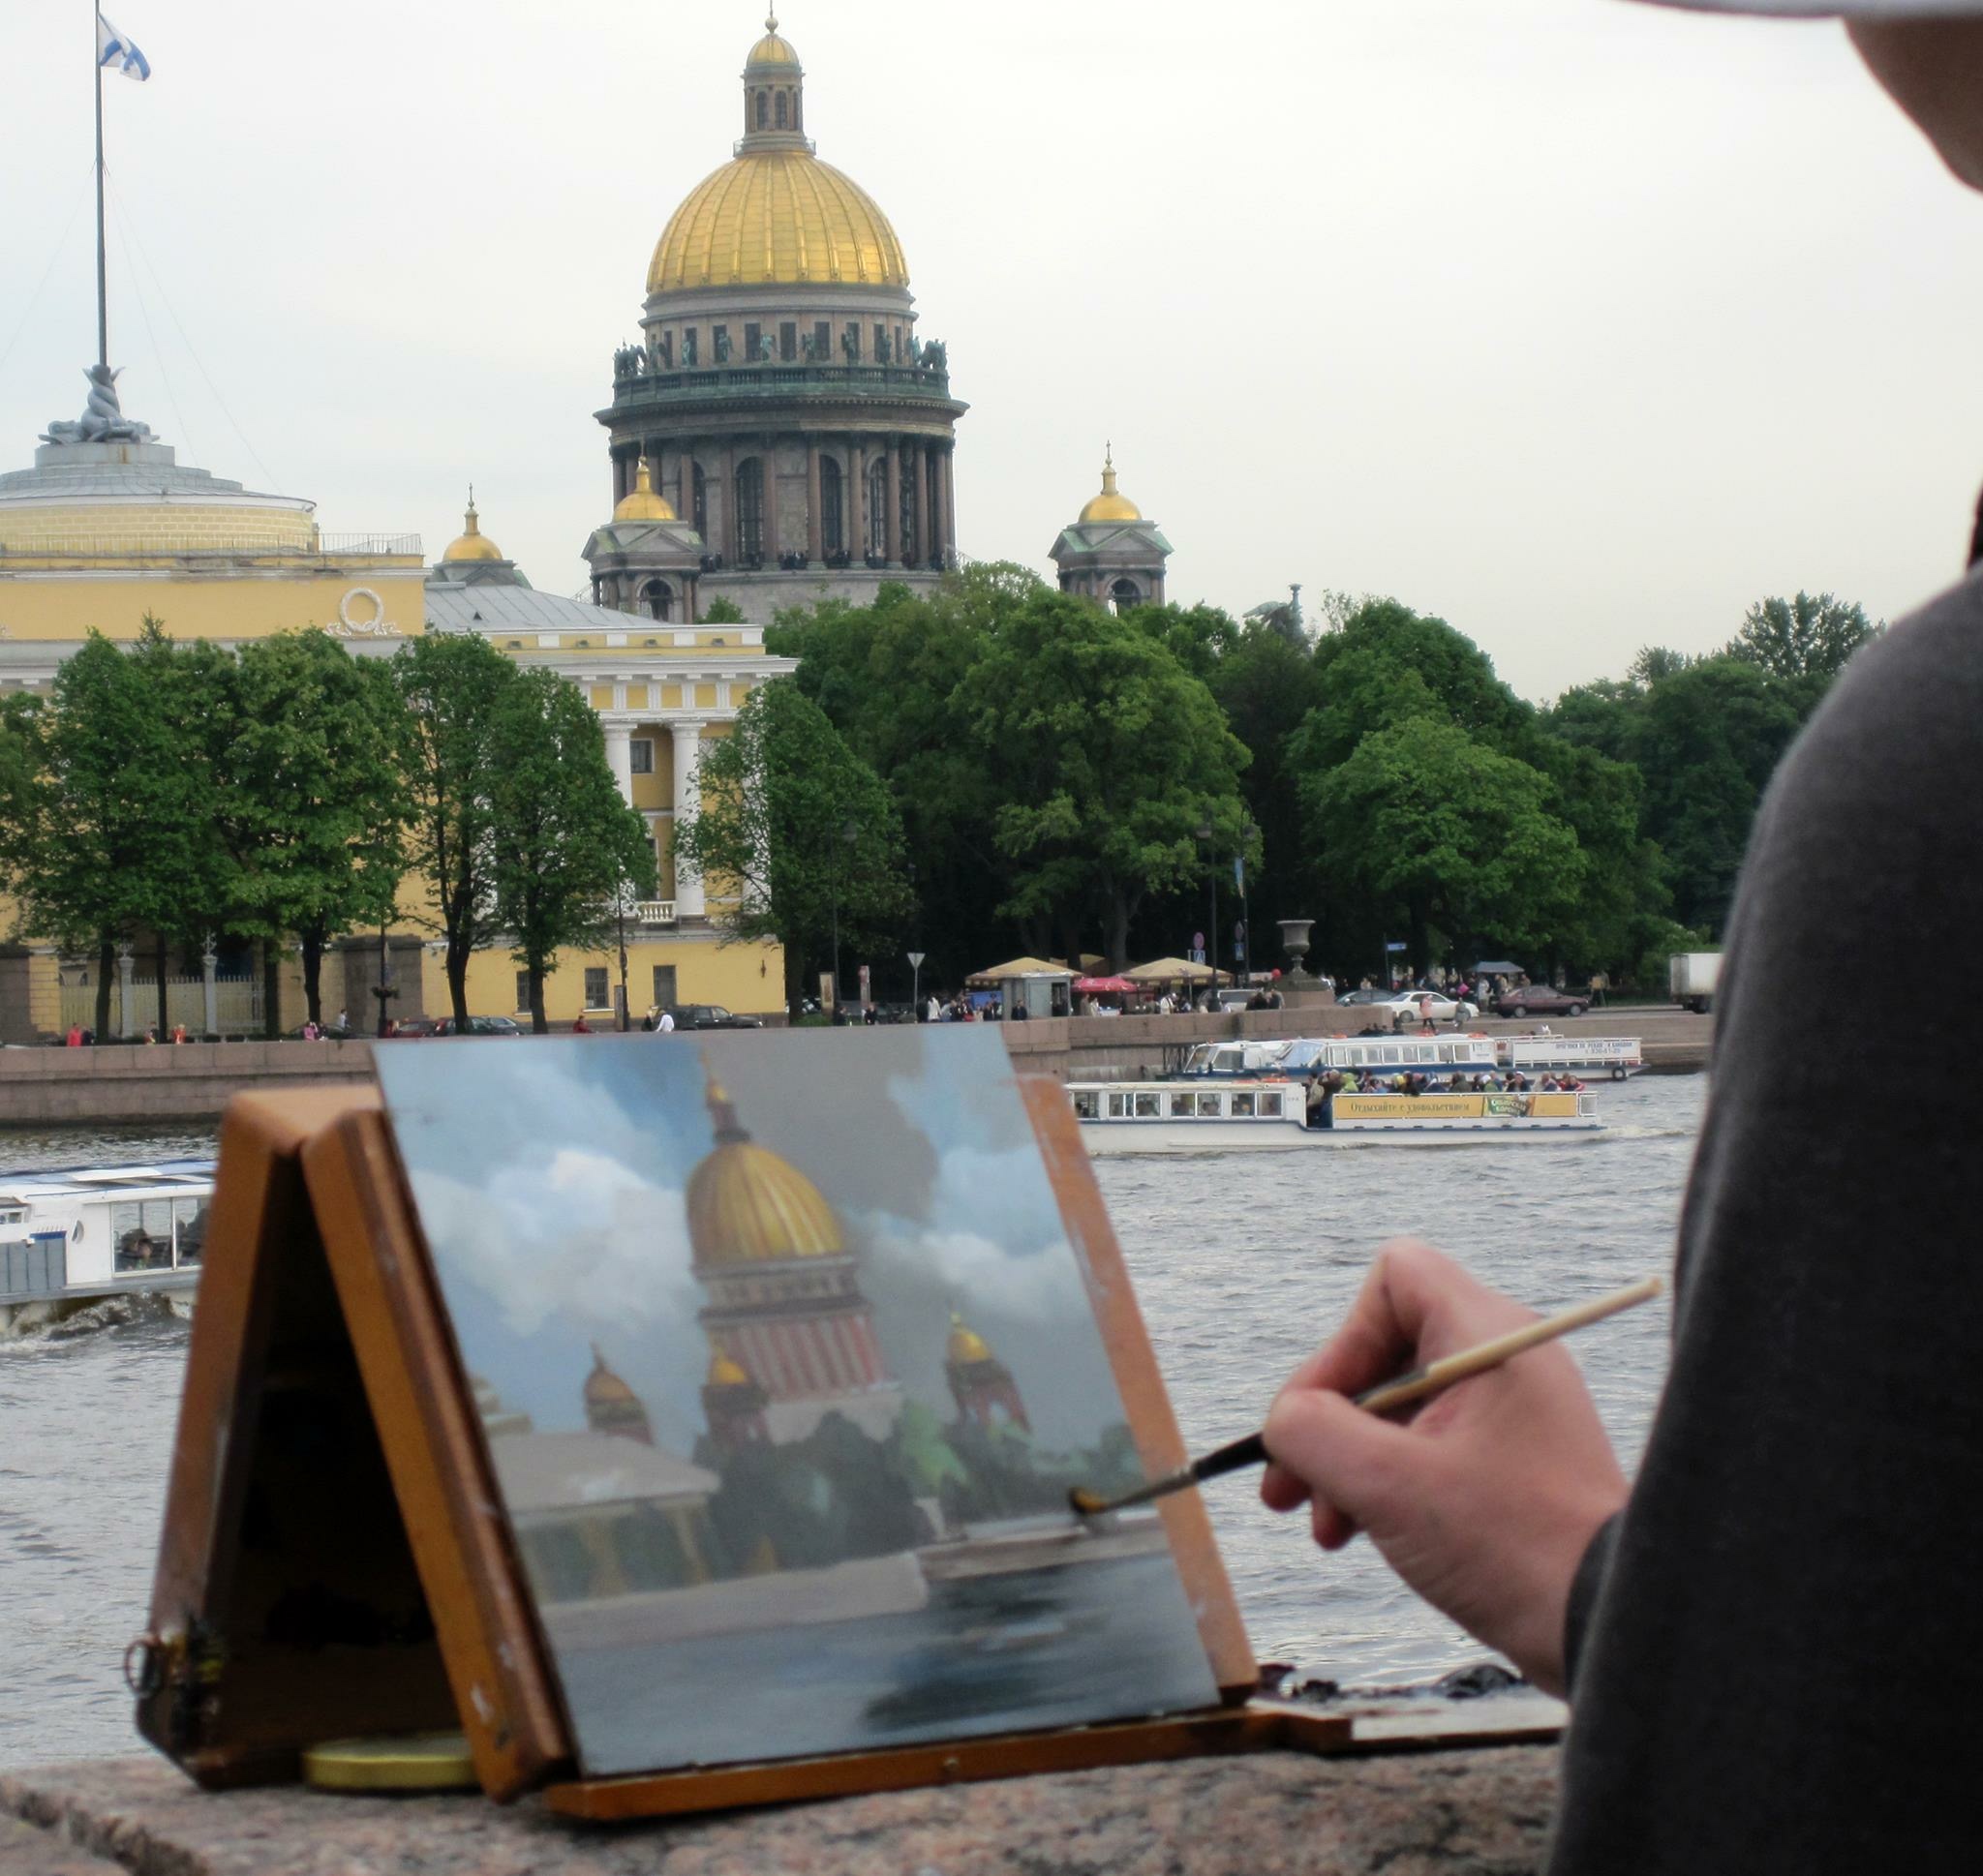 You are currently viewing Painting the Neva River in St. Petersburg, Russia